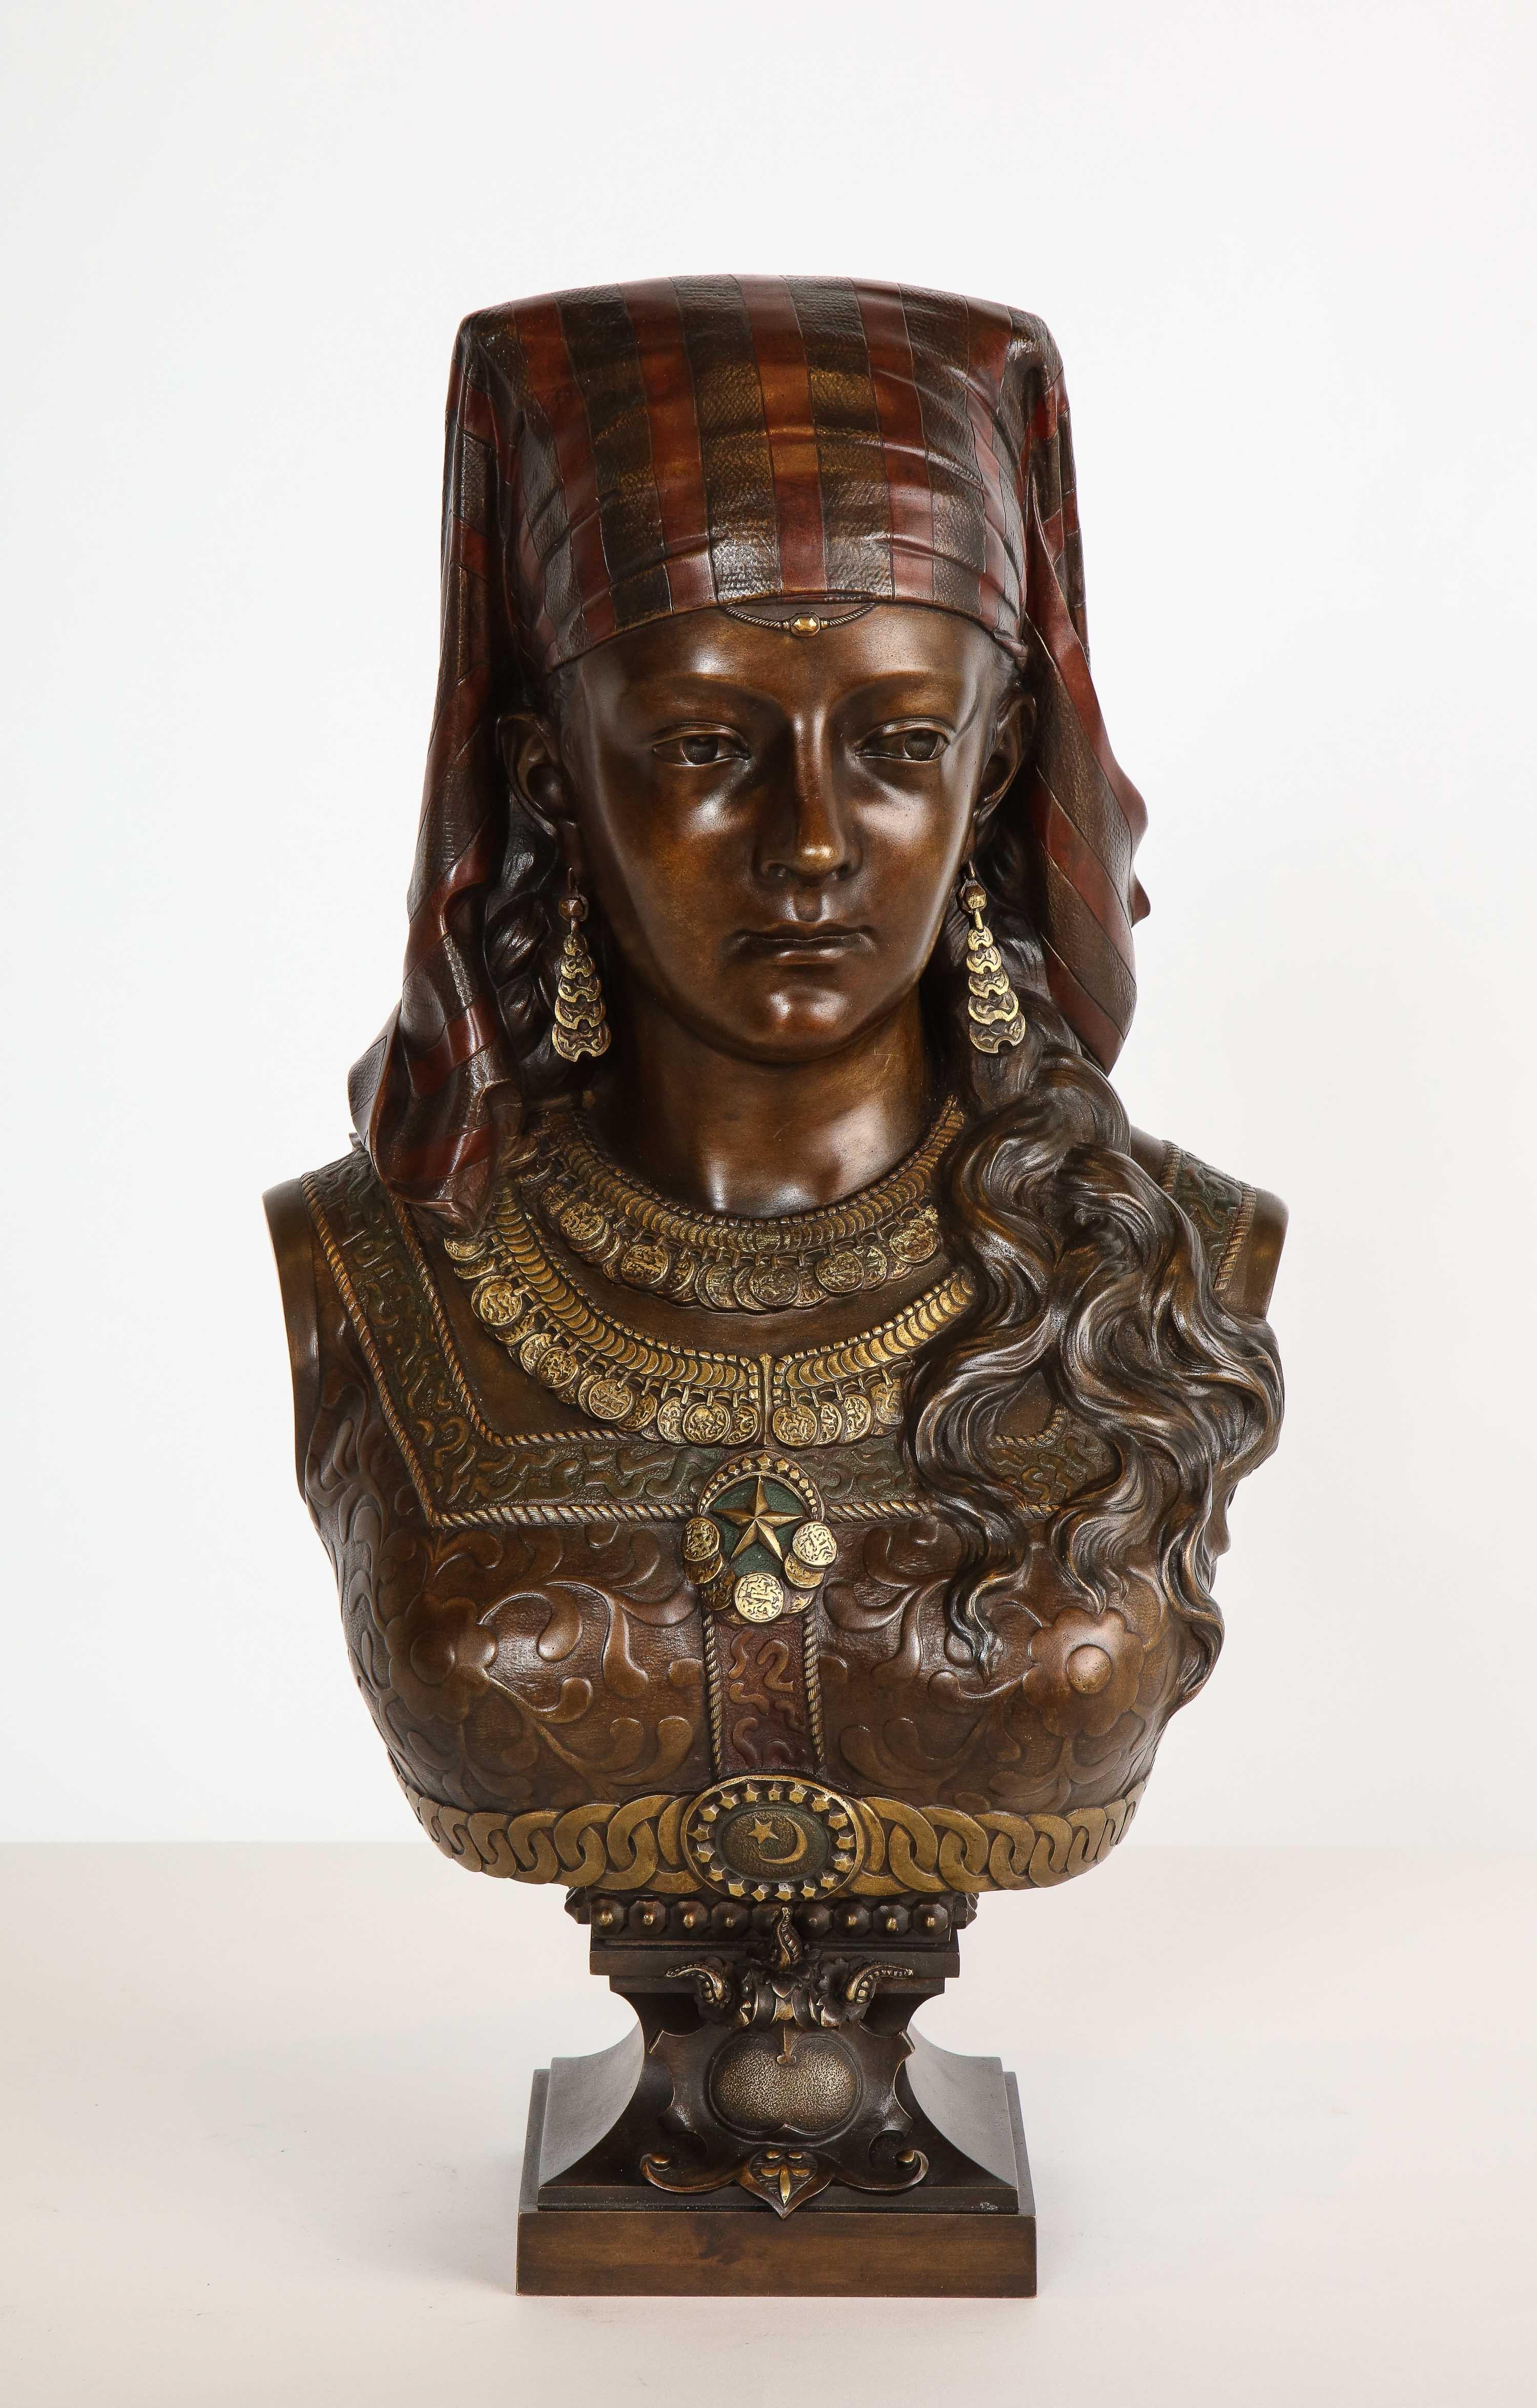 An exquisite French multi-patinated orientalist bronze bust of Saida, by Zacharie Rimbez, late 19th century.

Signed 'Z. Rimbez' (on the left shoulder)

Measures: 22